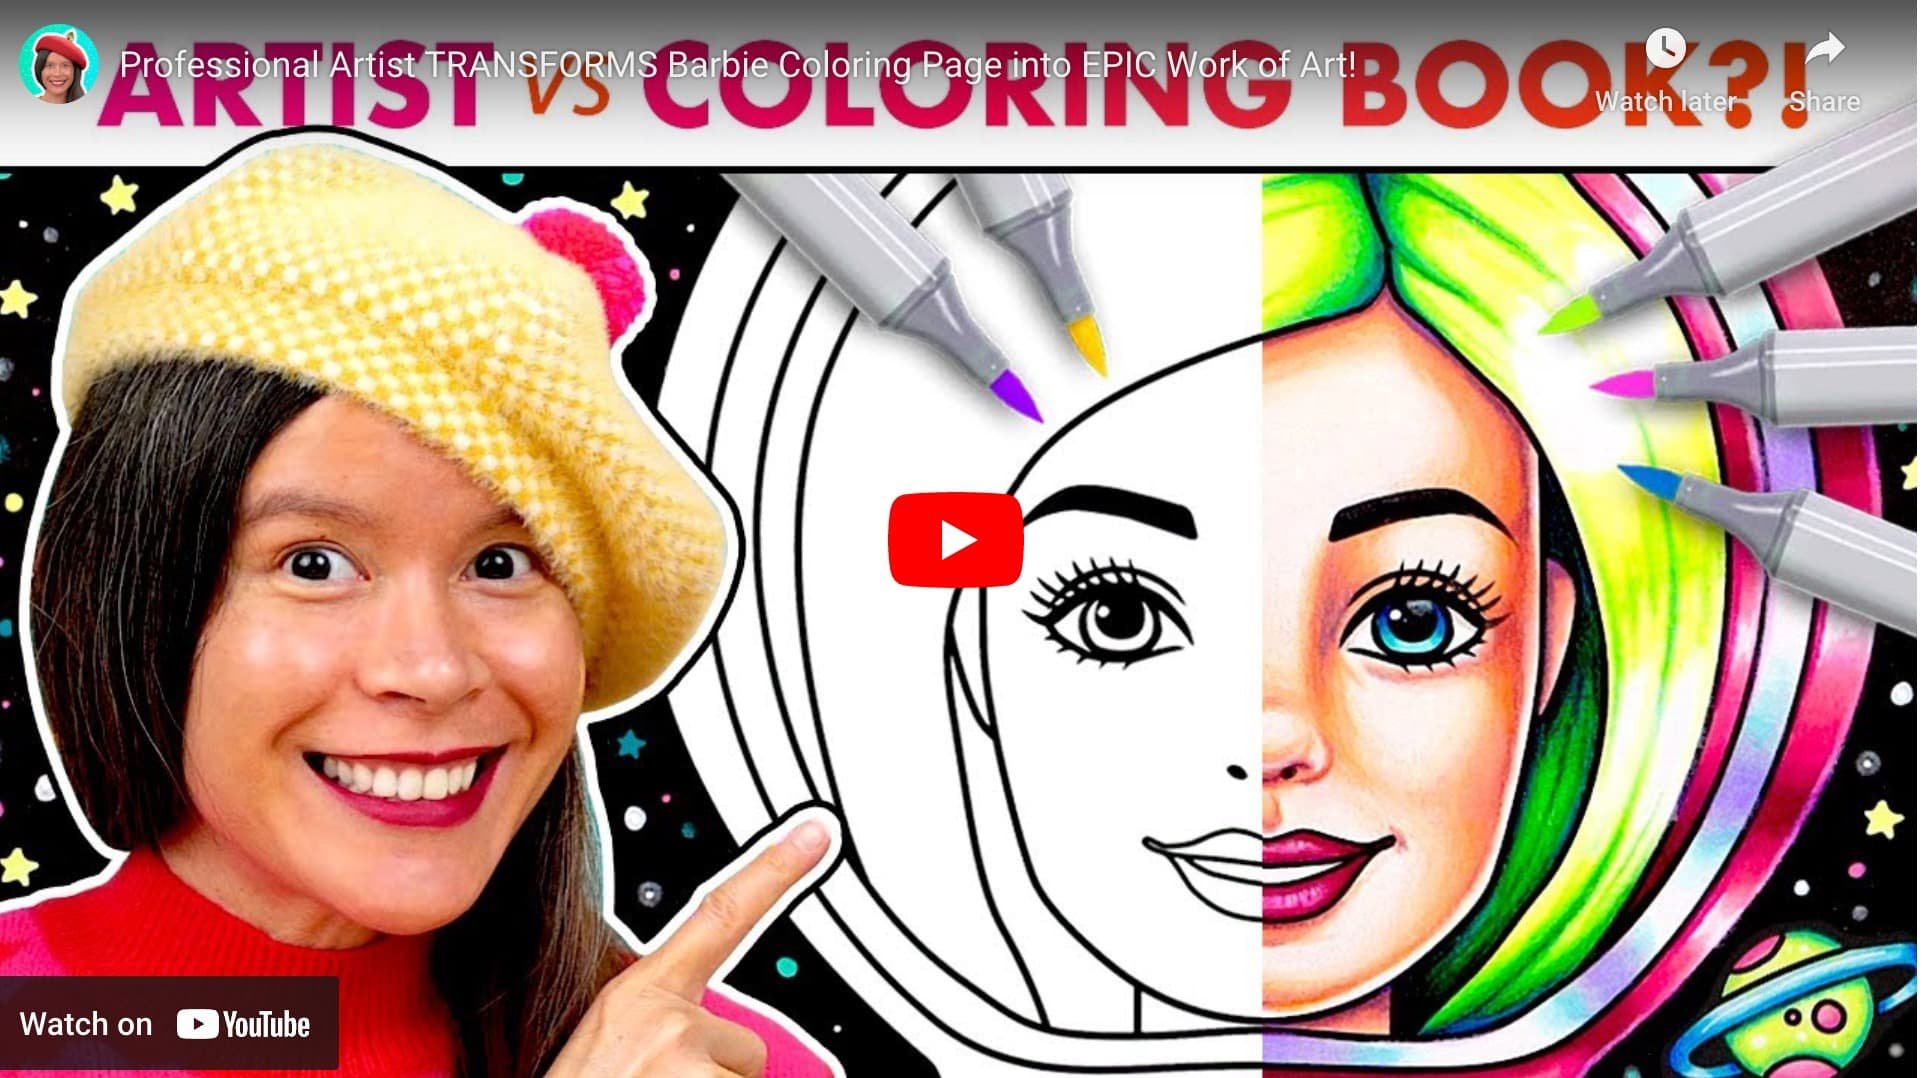 Barbie Coloring Page Tutorial by Thaneeya McArdle